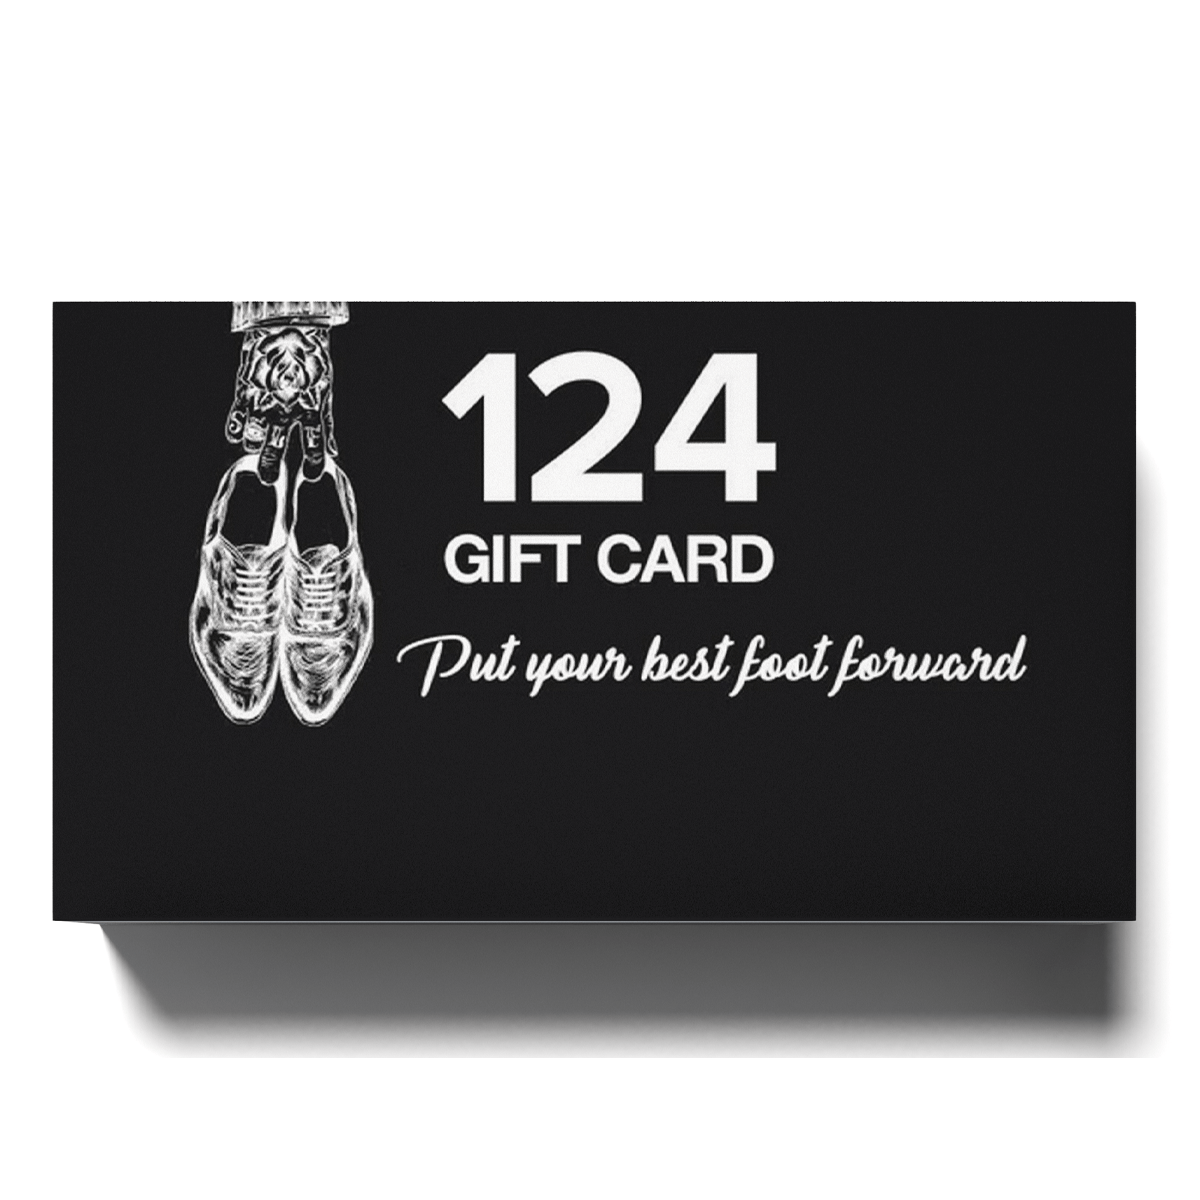 Gift Card Gift Card - 124 Shoes